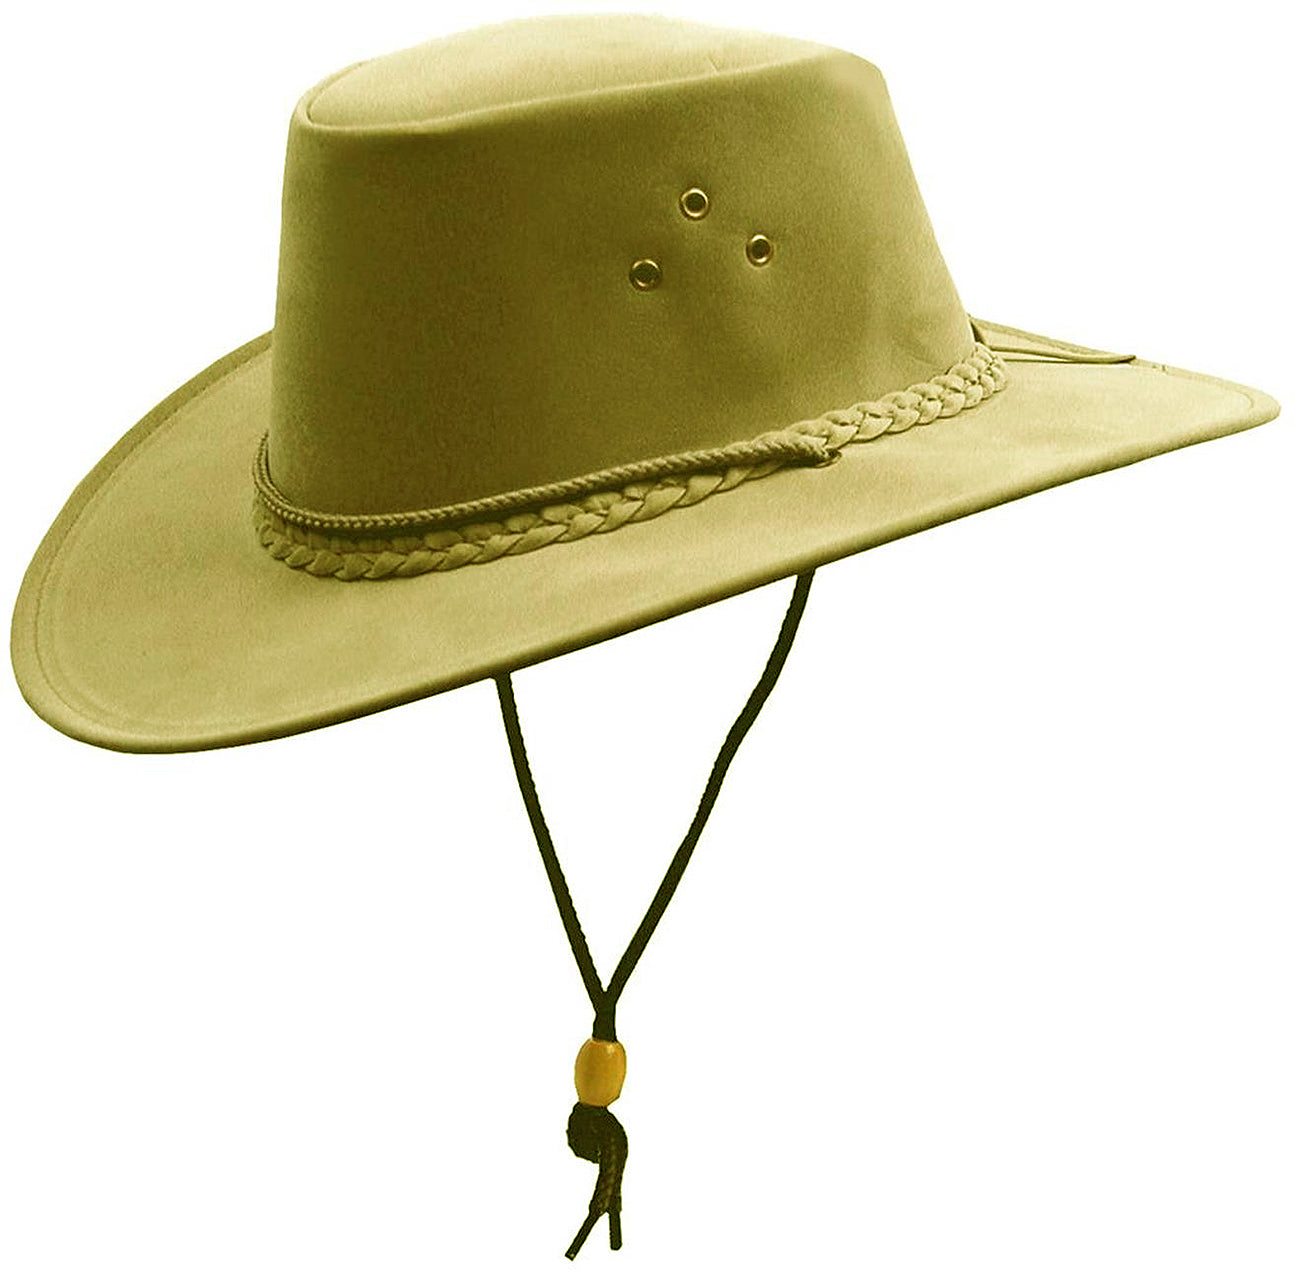 Children cowboy hat beach hat with chin band sun protection for boys and girls